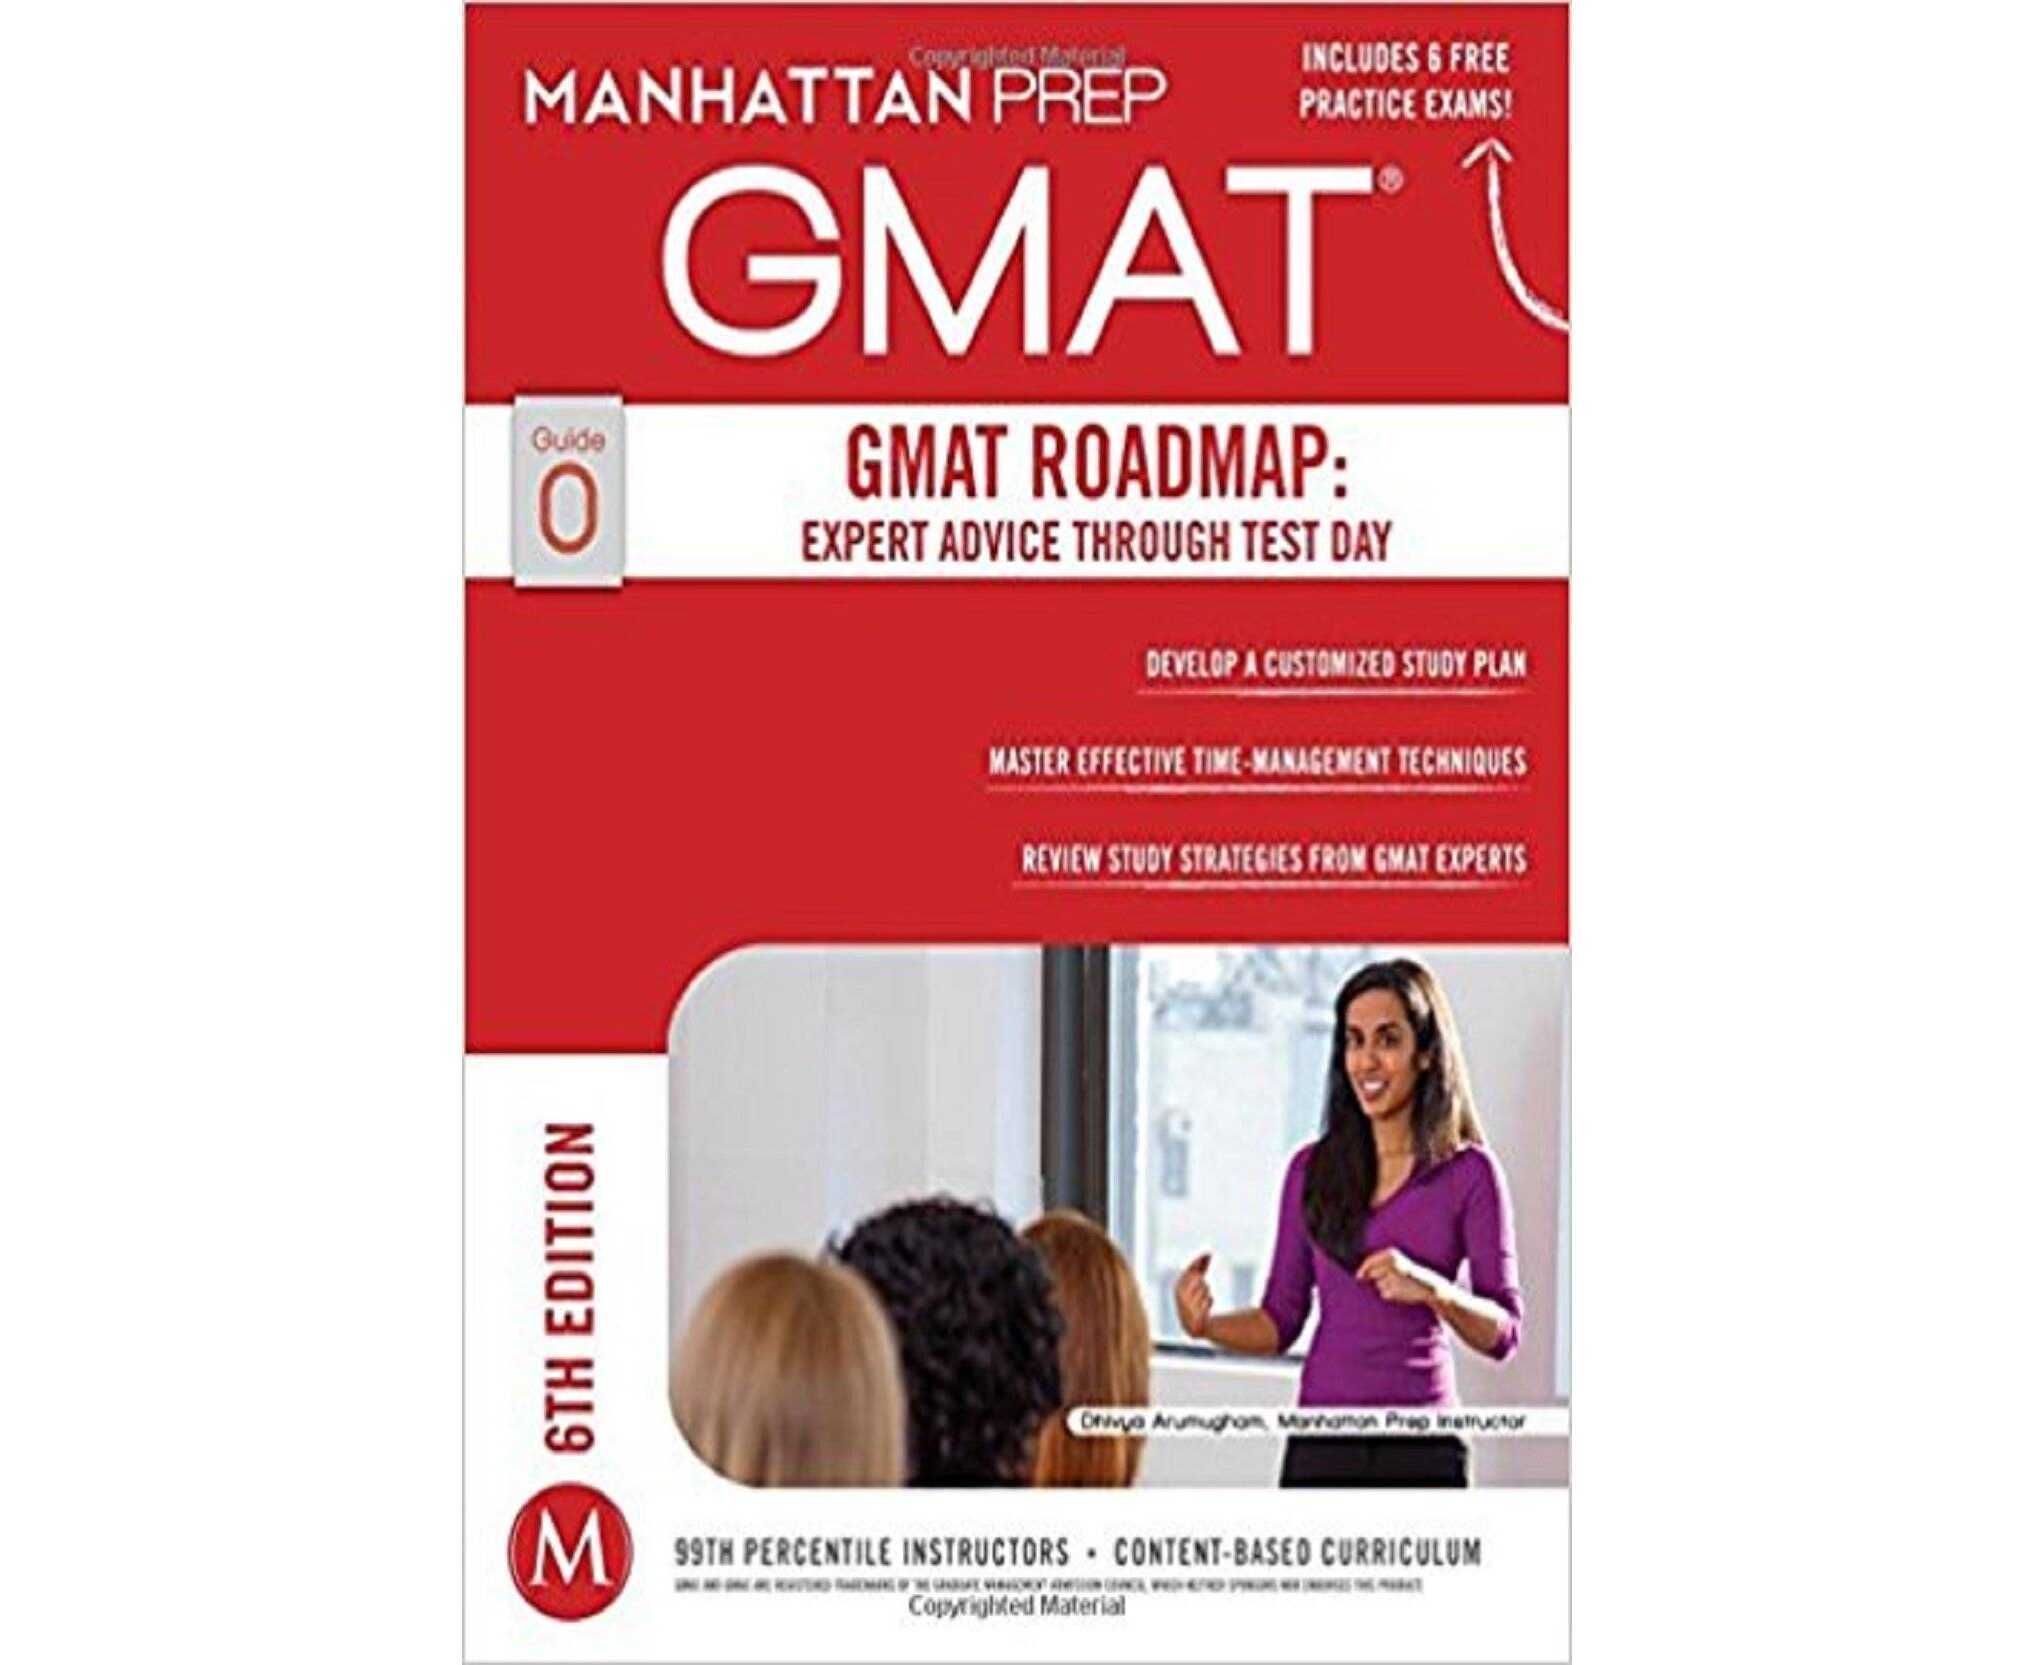 Notes,　Crafts　Test　::　Roadmap:　6/E　Expert　::　Books　::　::　Books　Gmat　Gmat　Guide　Home　Papers　Day　(PB)　LifeStyle　Advice　Stationery　Through